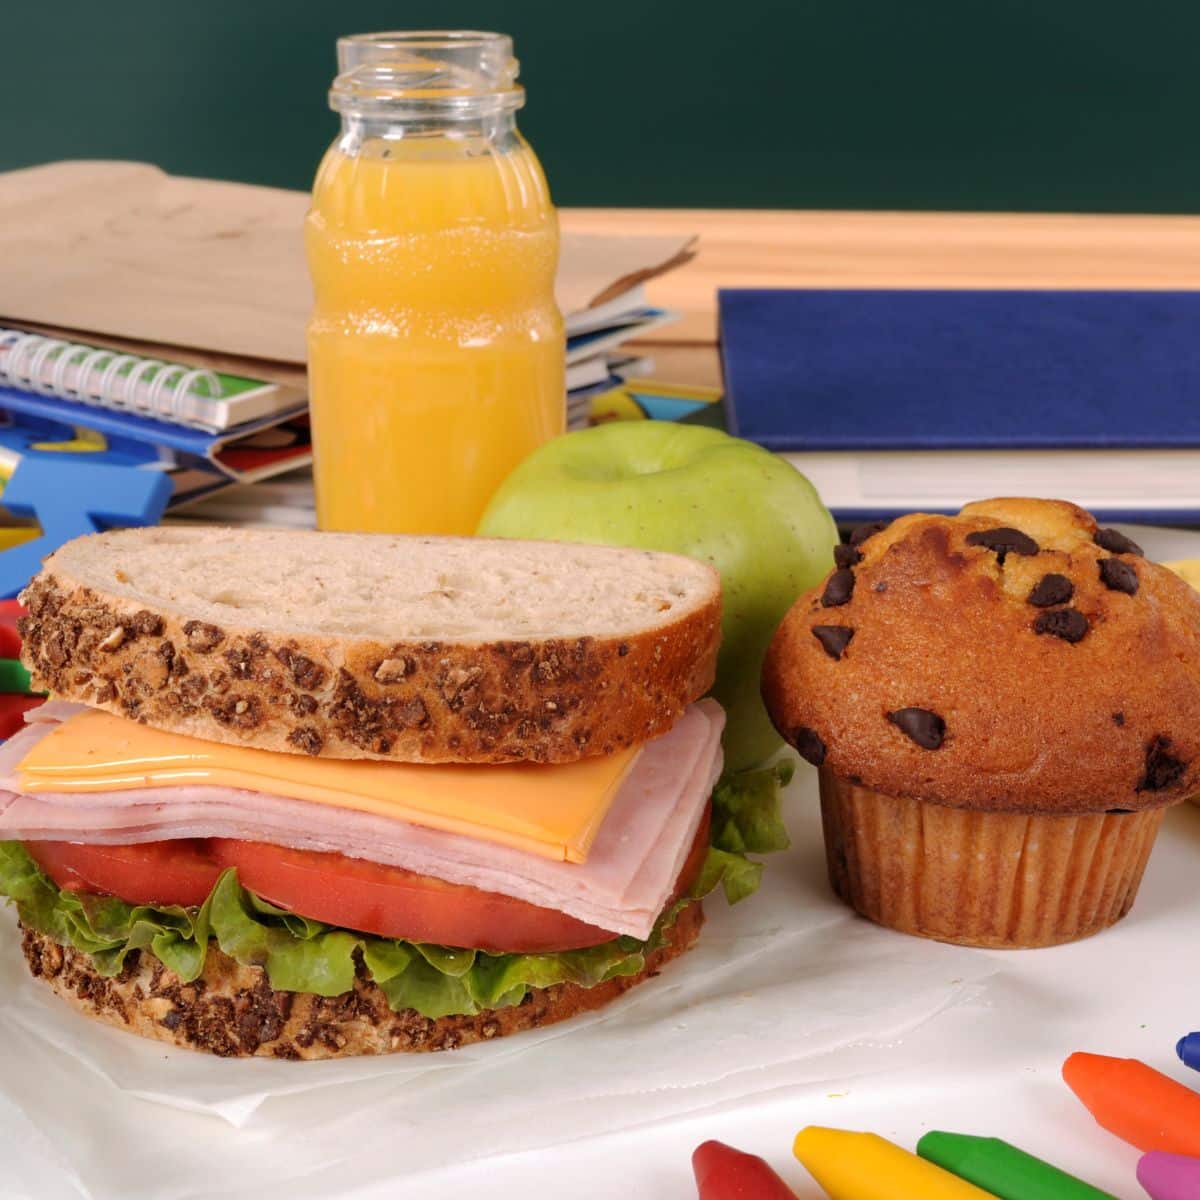 School lunch box with sandwich and thermos of juice on table. Ready for  school. Stock Photo